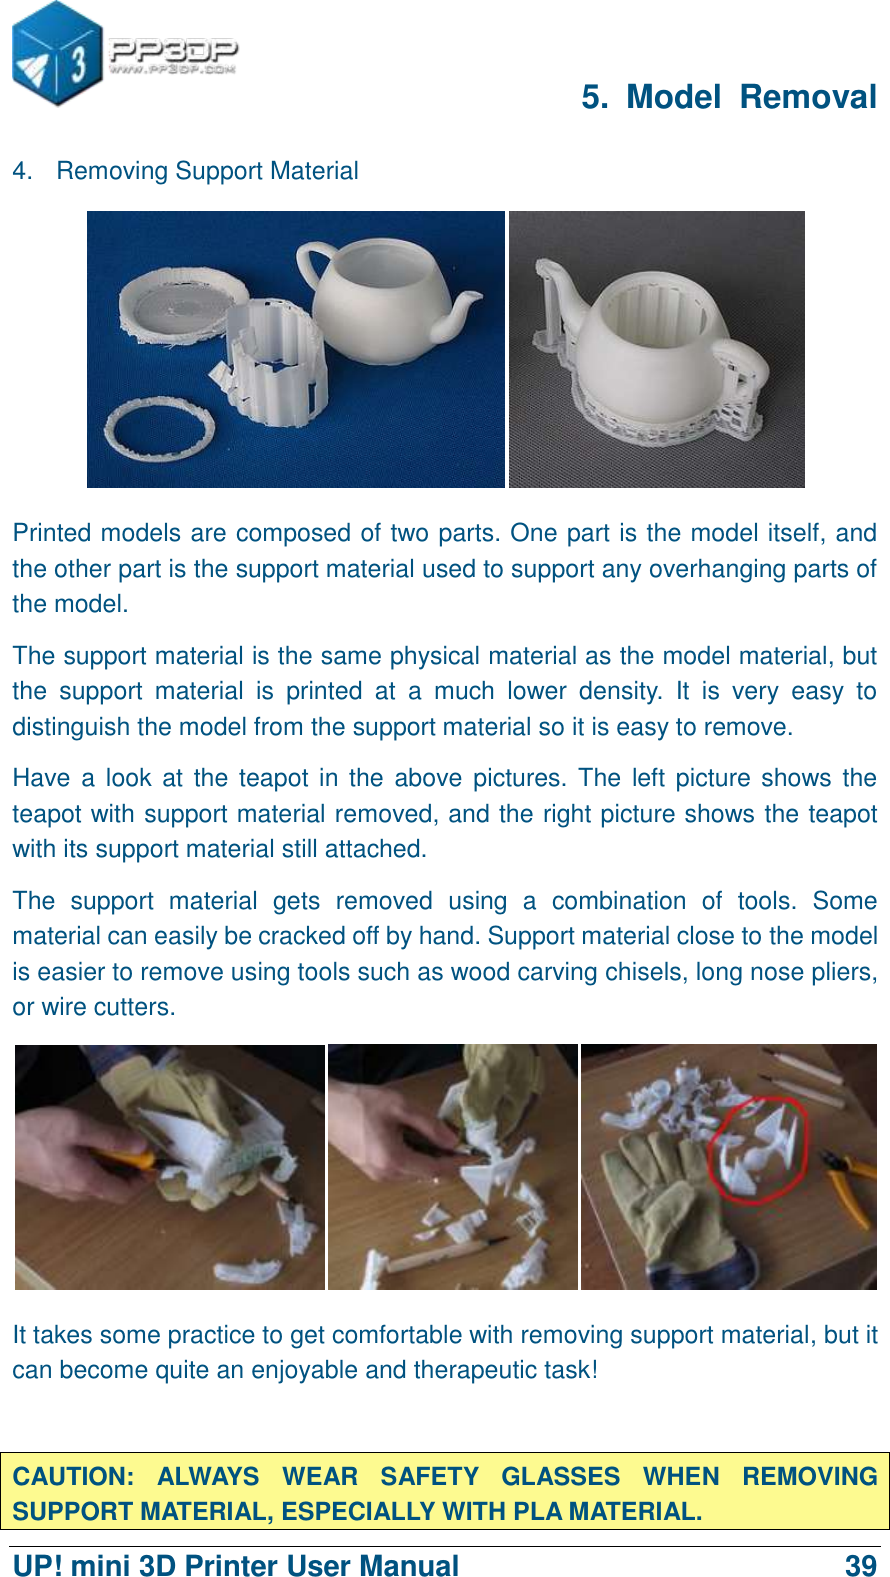      5.  Model  Removal  UP! mini 3D Printer User Manual                                39 4.  Removing Support Material  Printed models are composed of two parts. One part is the model itself, and the other part is the support material used to support any overhanging parts of the model.   The support material is the same physical material as the model material, but the  support  material  is  printed  at  a  much  lower  density.  It  is  very  easy  to distinguish the model from the support material so it is easy to remove.   Have a  look at the teapot in the  above  pictures. The left picture shows the teapot with support material removed, and the right picture shows the teapot with its support material still attached.   The  support  material  gets  removed  using  a  combination  of  tools.  Some material can easily be cracked off by hand. Support material close to the model is easier to remove using tools such as wood carving chisels, long nose pliers, or wire cutters.  It takes some practice to get comfortable with removing support material, but it can become quite an enjoyable and therapeutic task!  CAUTION:  ALWAYS  WEAR  SAFETY  GLASSES  WHEN  REMOVING SUPPORT MATERIAL, ESPECIALLY WITH PLA MATERIAL. 